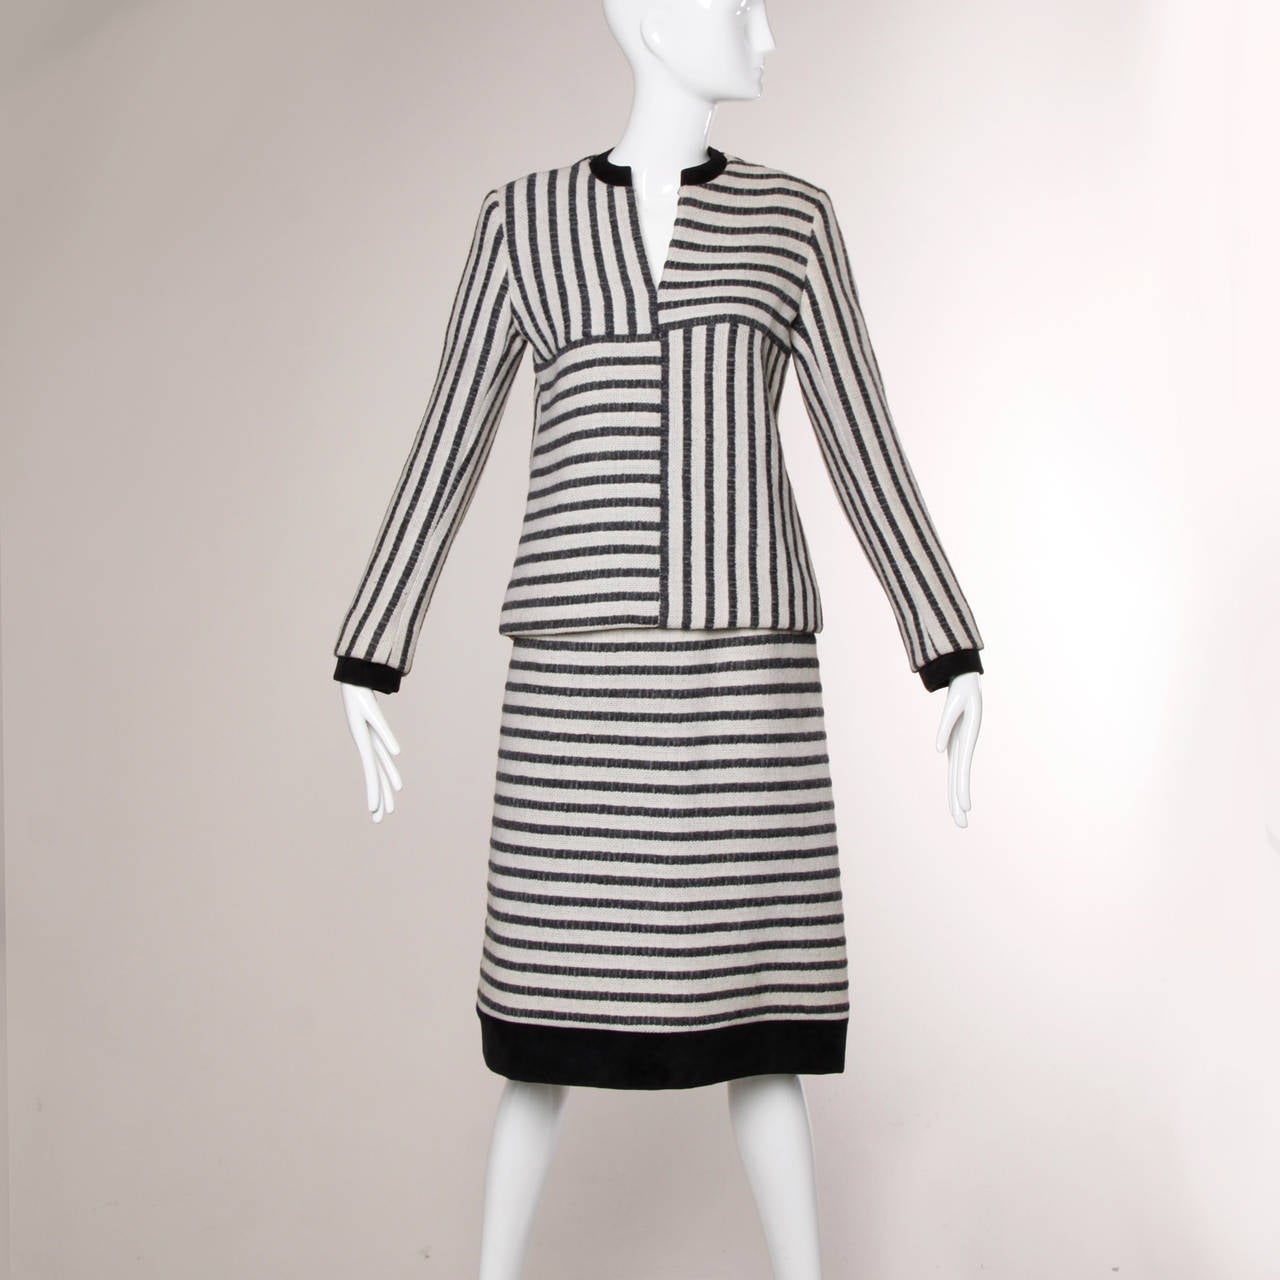 Reduced from $650. Gorgeous 1960s B.H. Wragge skirt suit in geometric striped woven wool. This ensemble features a top and skirt that can be worn together or separate. Couture hand stitched detailing and fully lined in silk. 

Details:

Fully